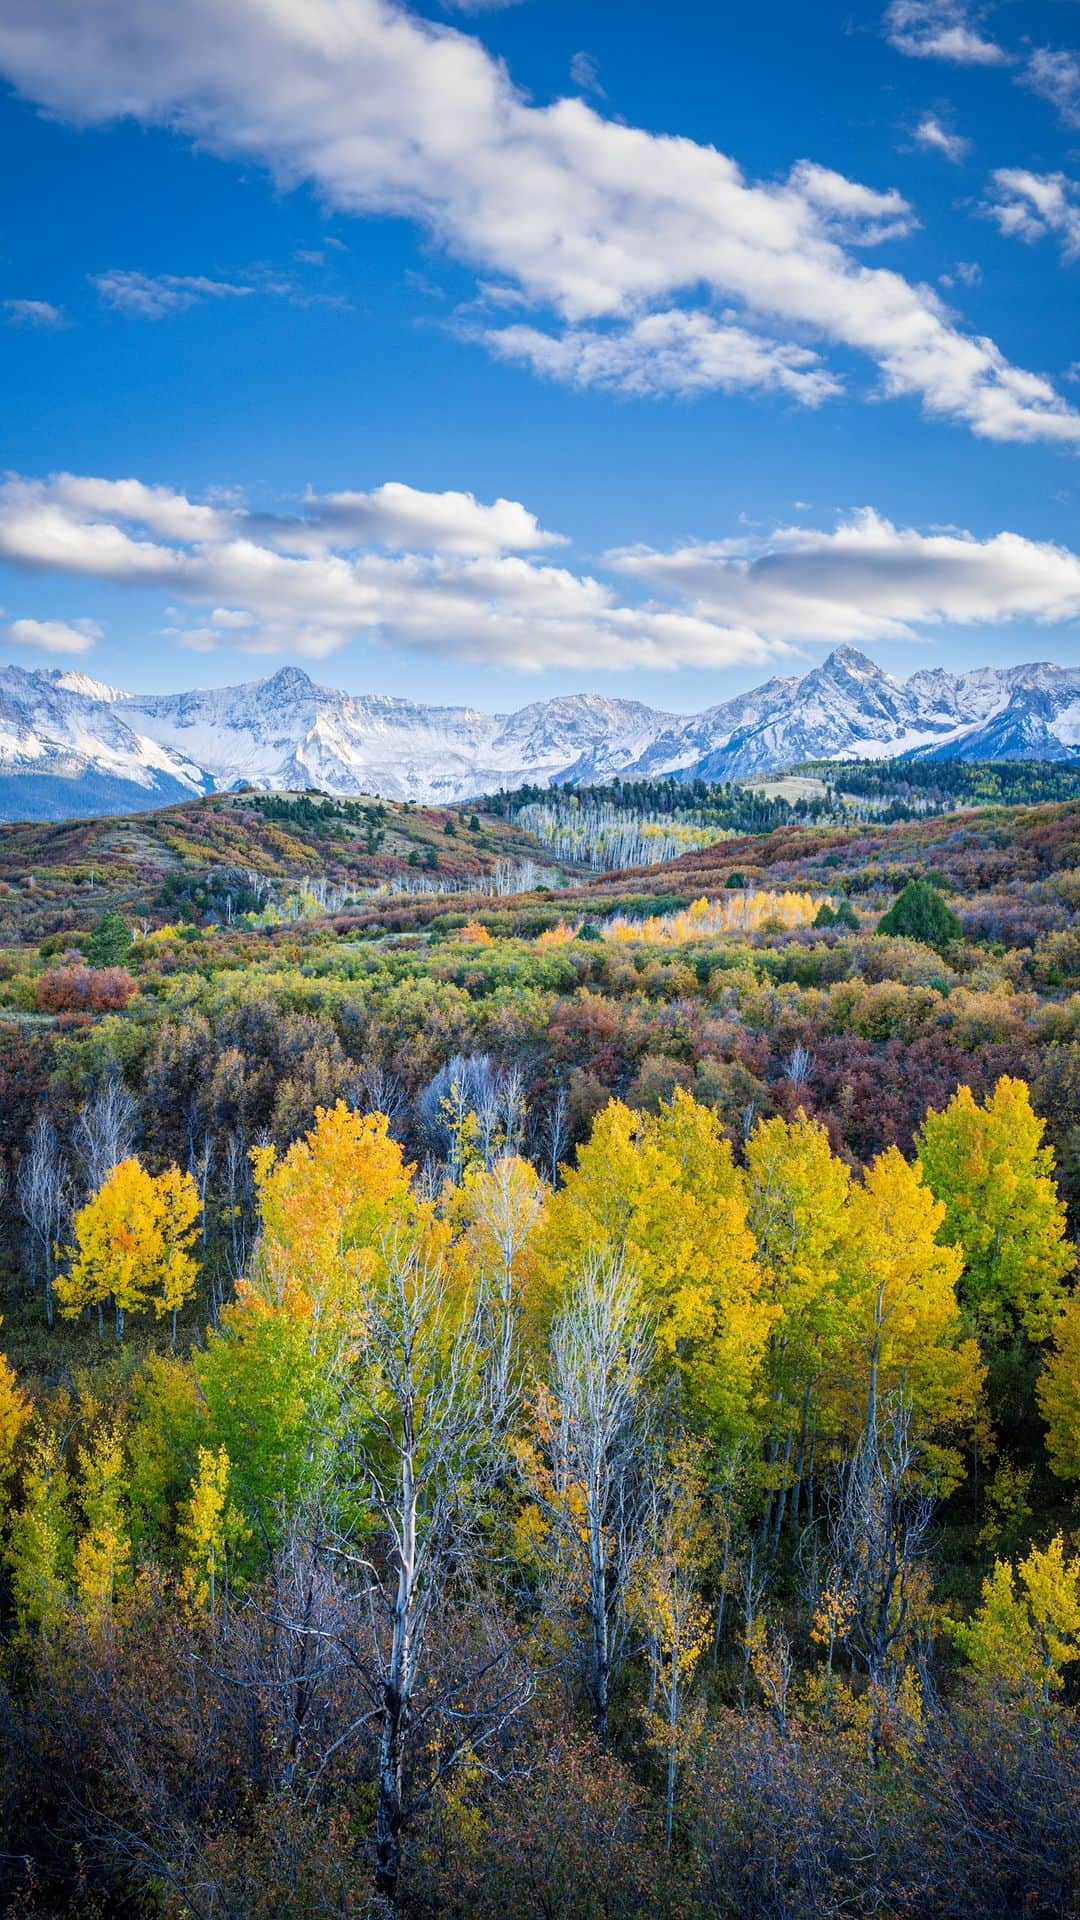 National Geographic Travelのインスタグラム：「Video by @jonathan_irish | Colorado is home to one of the most beautiful and vibrant displays of fall foliage in the entire country. Each year my anticipation builds as summer changes to fall and the weather starts to turn cold because I know that the aspen trees will soon become a blazing bright yellow. With snow-capped mountain peaks as the backdrop for this explosion of autumn color, the change of seasons here makes for a truly awe-inspiring view in almost every direction. This year, I traveled to Ouray, Colorado, to explore the backroads and grand vistas near this western mountain town. Situated in a river valley at nearly 8,000 feet (2,500 meters) of elevation, Ouray (pronounced “YOU-ray”) is surrounded by the San Juan Mountains and flanked by seemingly endless groves of aspen trees. It’s the perfect location for photographing fall foliage. Come along as I hike, explore, and photograph these dense groves of yellow and orange leaves with the big blue sky overhead. | The all-new 2024 Subaru Crosstrek Wilderness is designed for your biggest adventure yet. The newest vehicle to join the Subaru Wilderness Family is ready to help you explore off-road every season.」